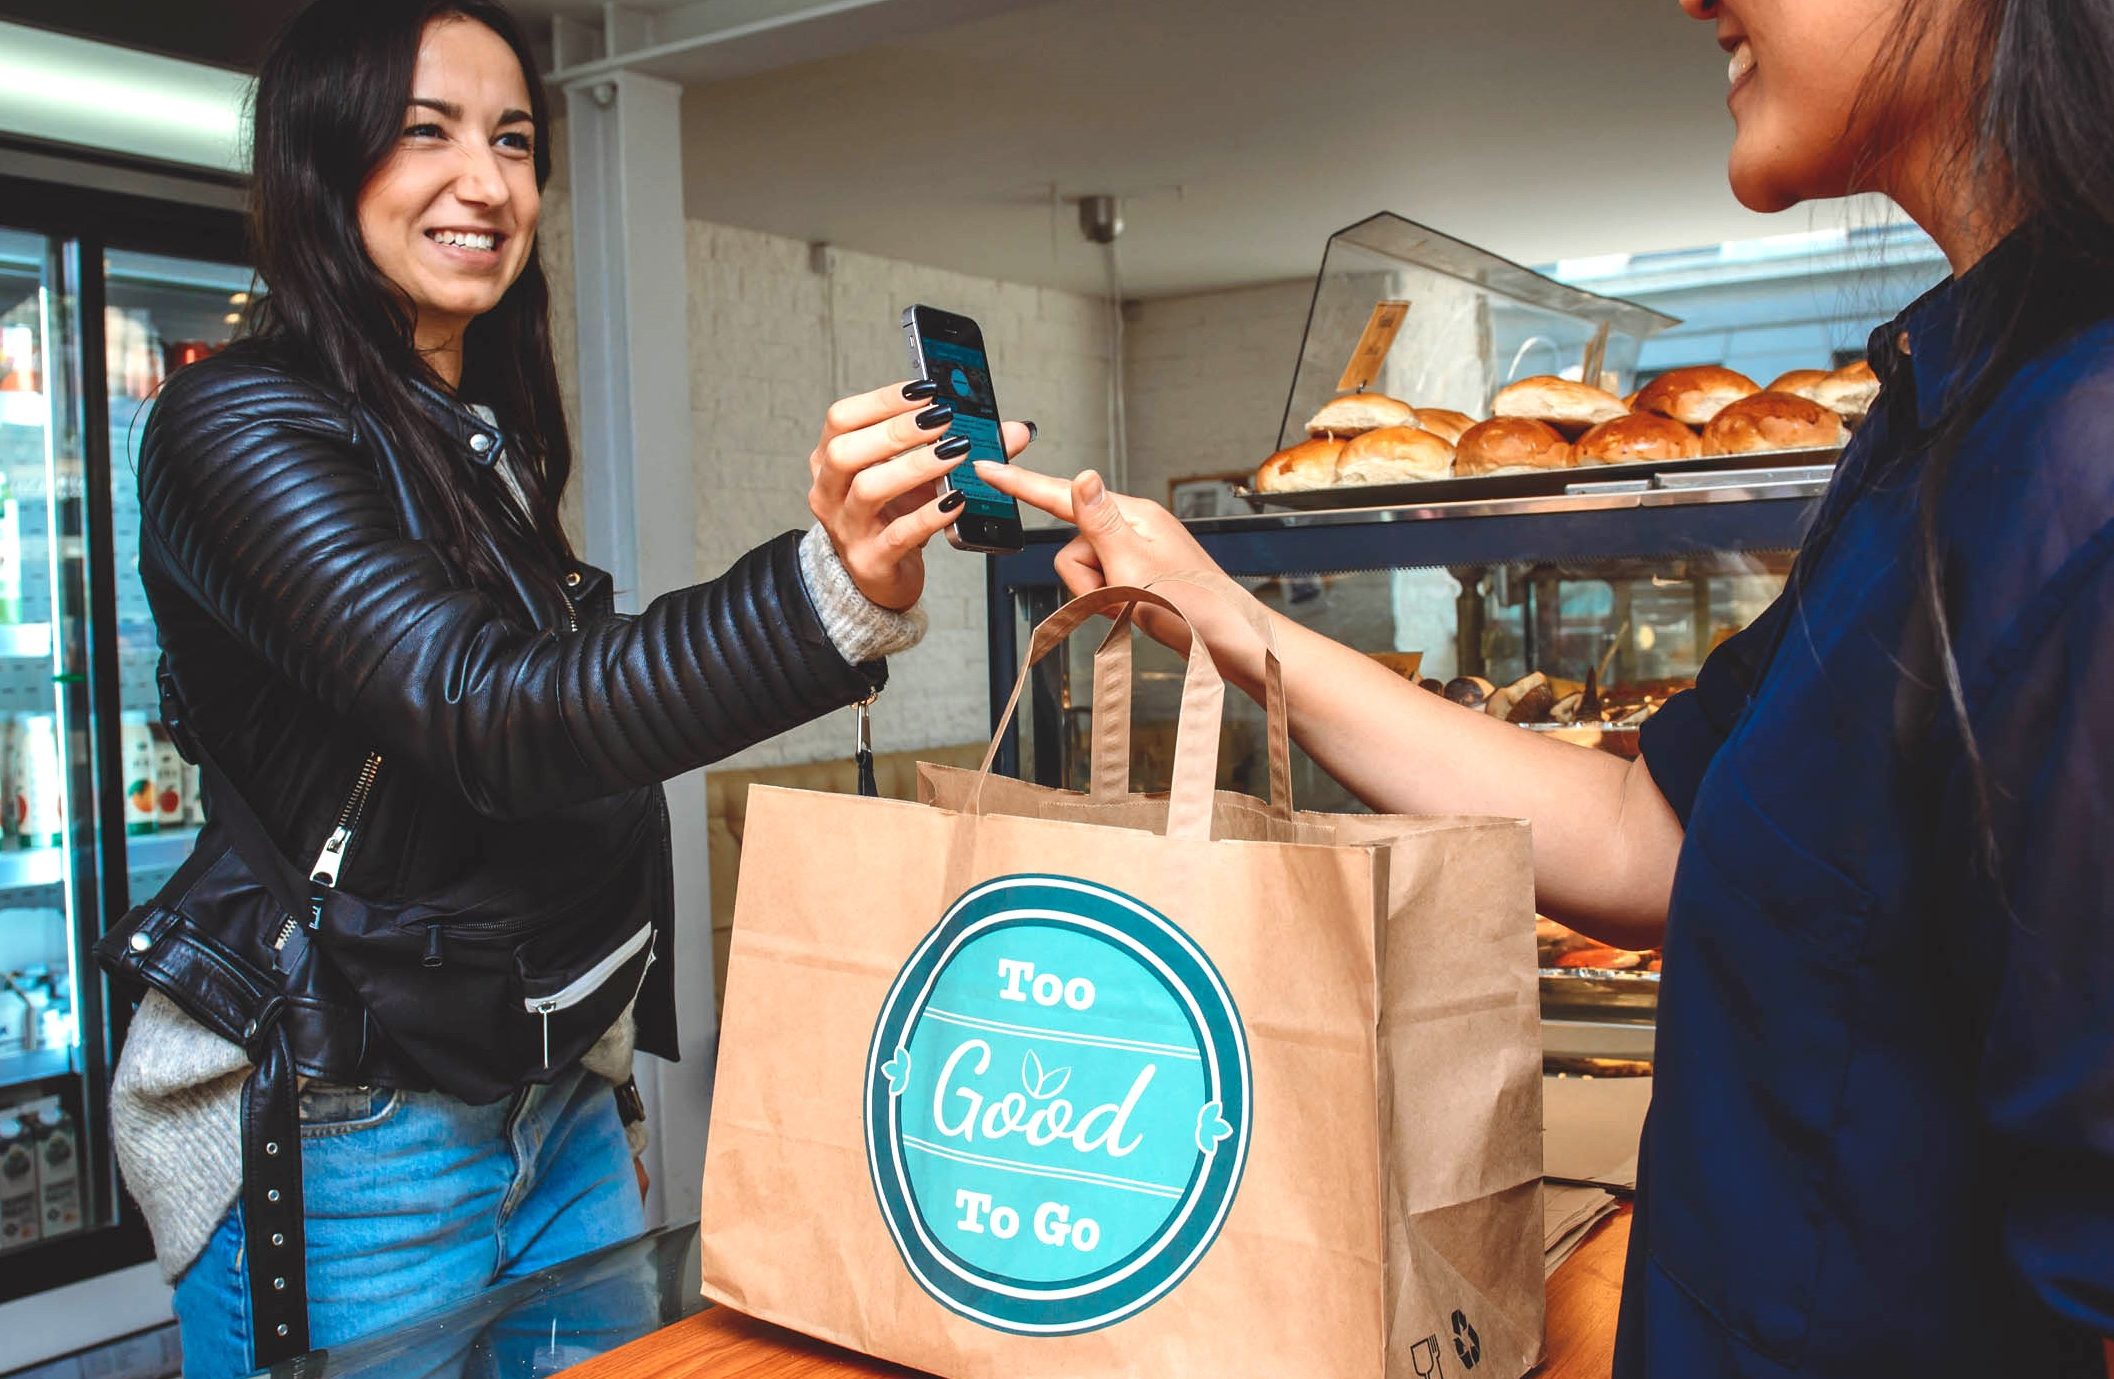 A customer saves food destined for the bin with the Too Good To Go app. (Too Good To Go)